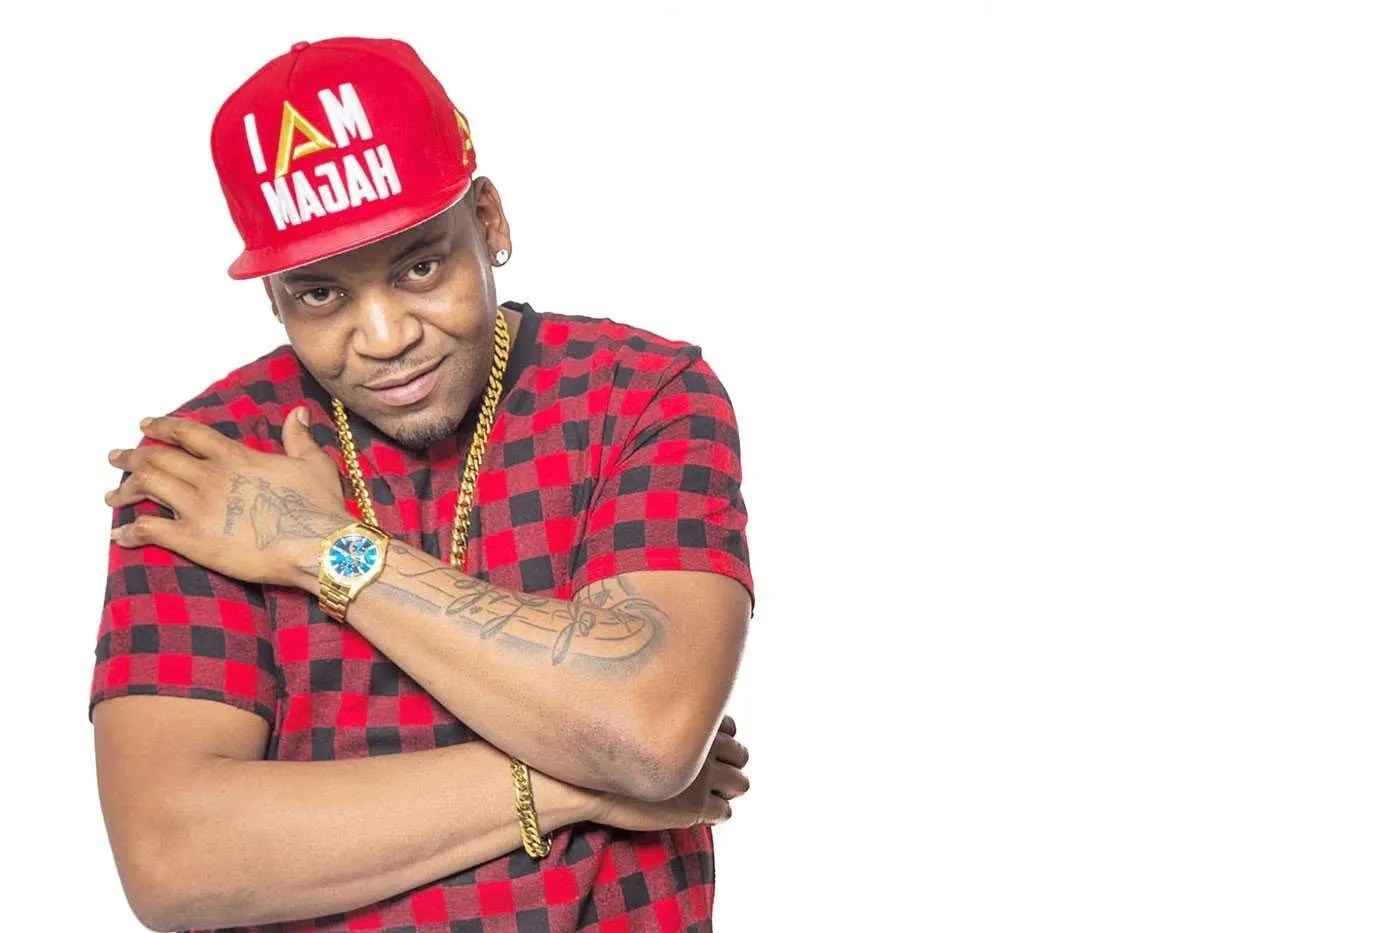 Majah Hype Arrested on Felony Charges in USA Nationwide 90FM